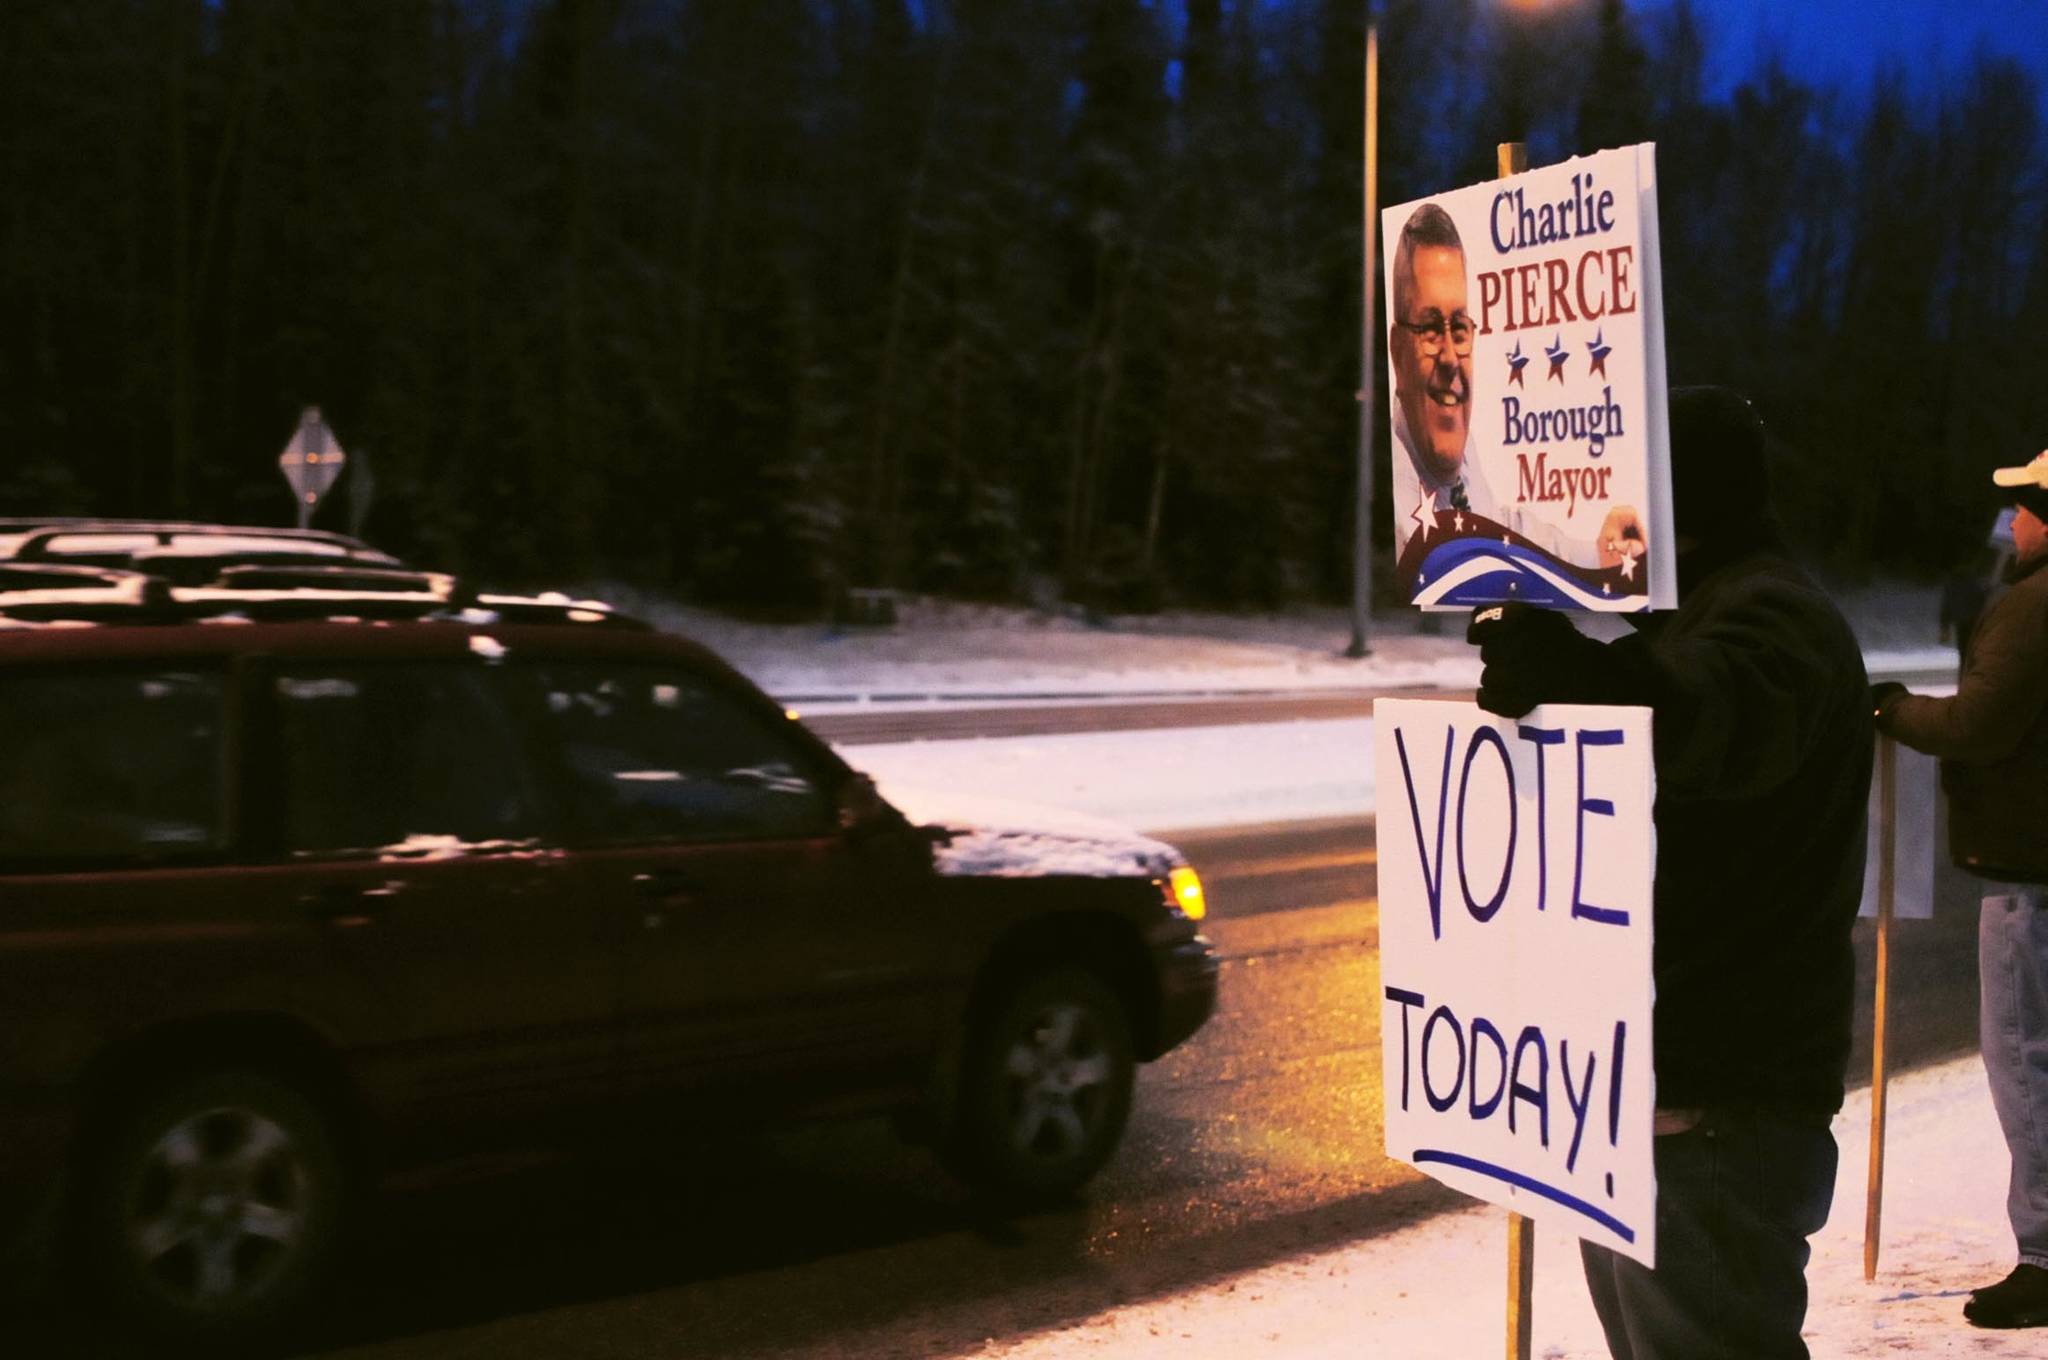 A car passes supporters waving signs for borough mayoral candidate Charlie Pierce at the intersection of the Sterling Highway and the Kenai Spur Highway on Tuesday, Oct. 24, 2017 in Soldotna, Alaska. Kenai Peninsula voters chose between Pierce and candidate Linda Hutchings for the office of borough mayor on Tuesday. (Photo by Elizabeth Earl/Peninsula Clarion)